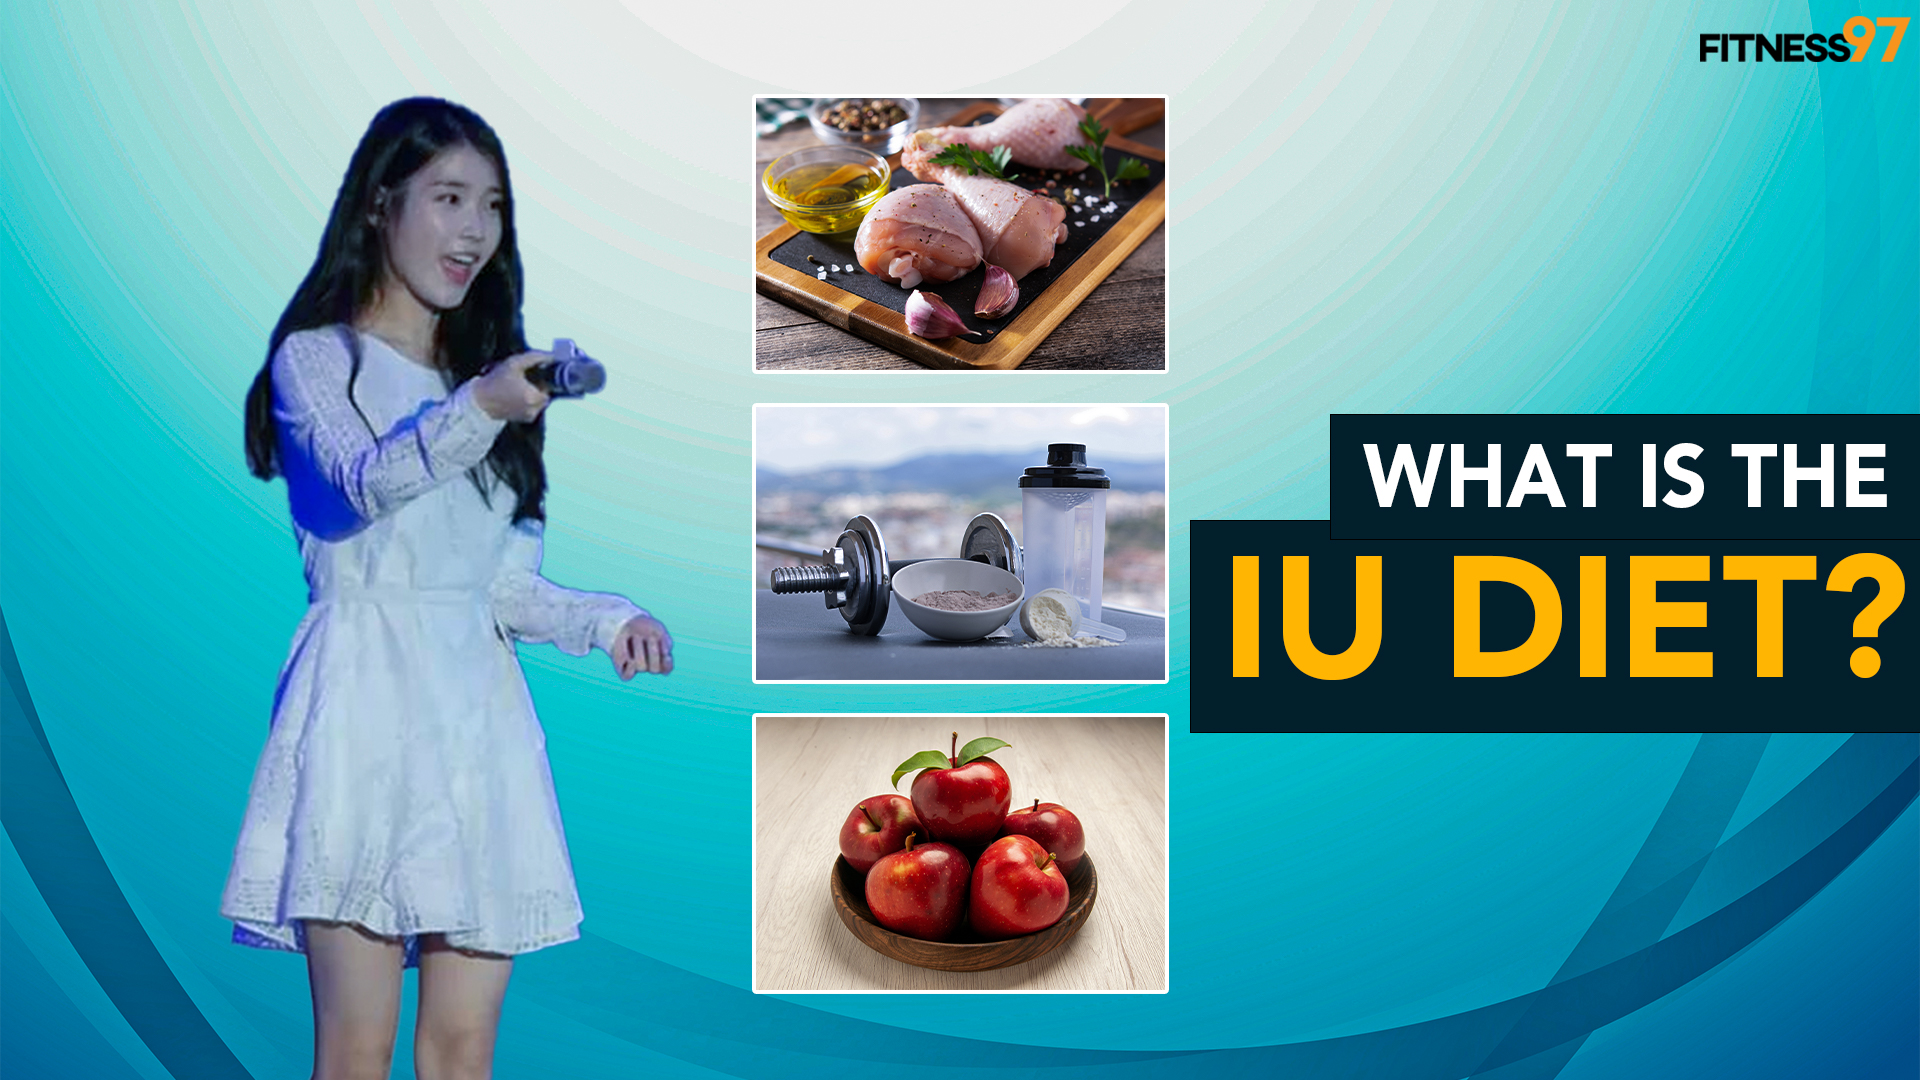 What is the “IU diet”? Can I follow it?